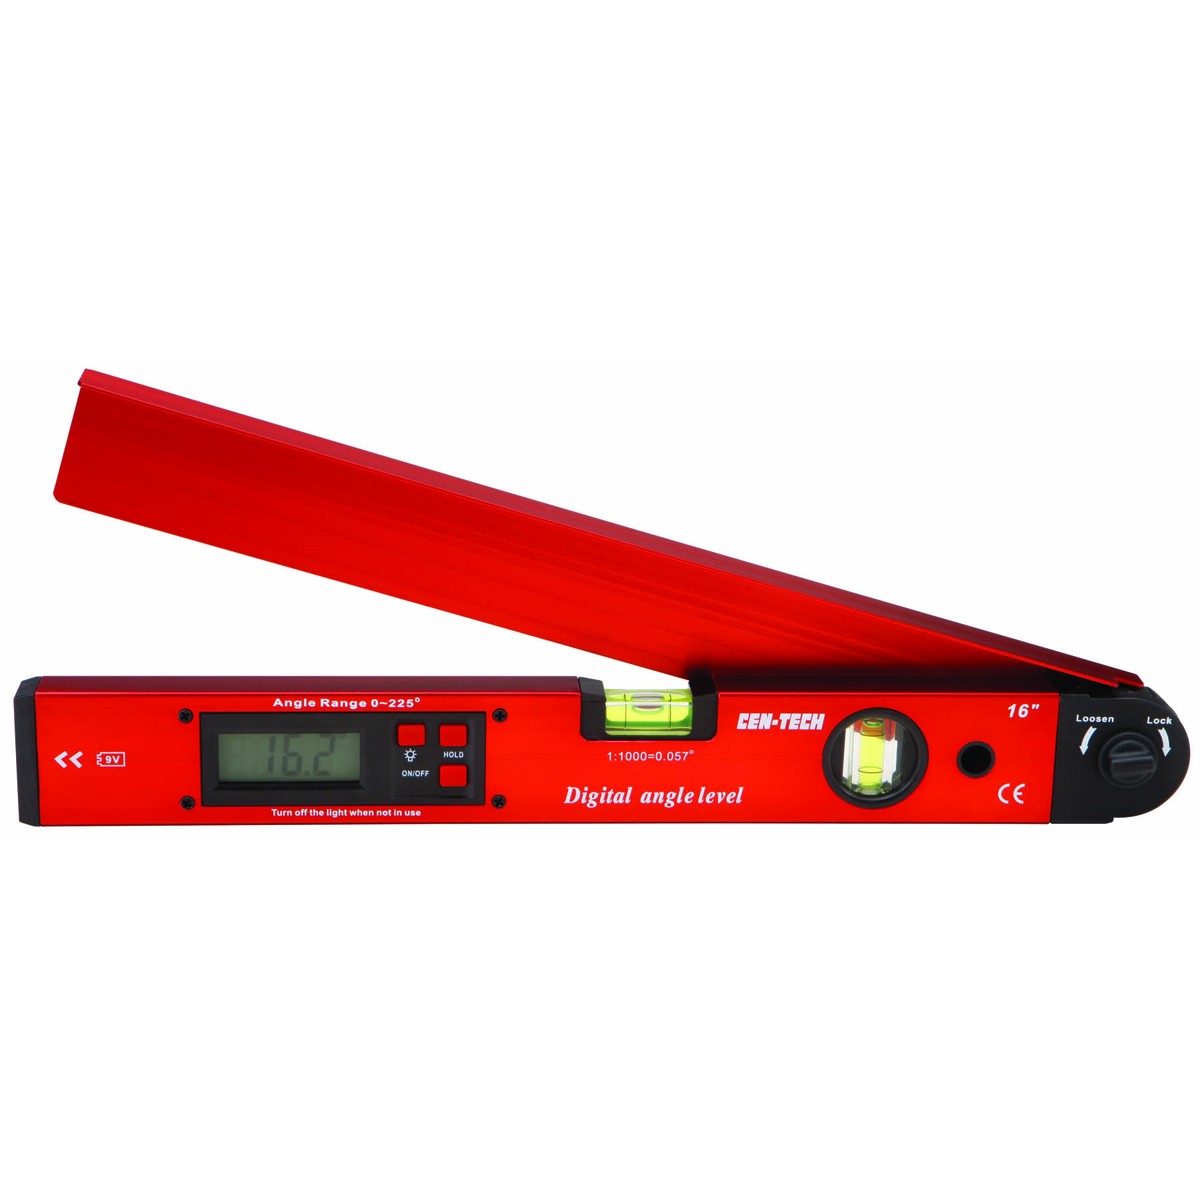 PITTSBURGH 16 in. Digital Angle Level - Item 65451